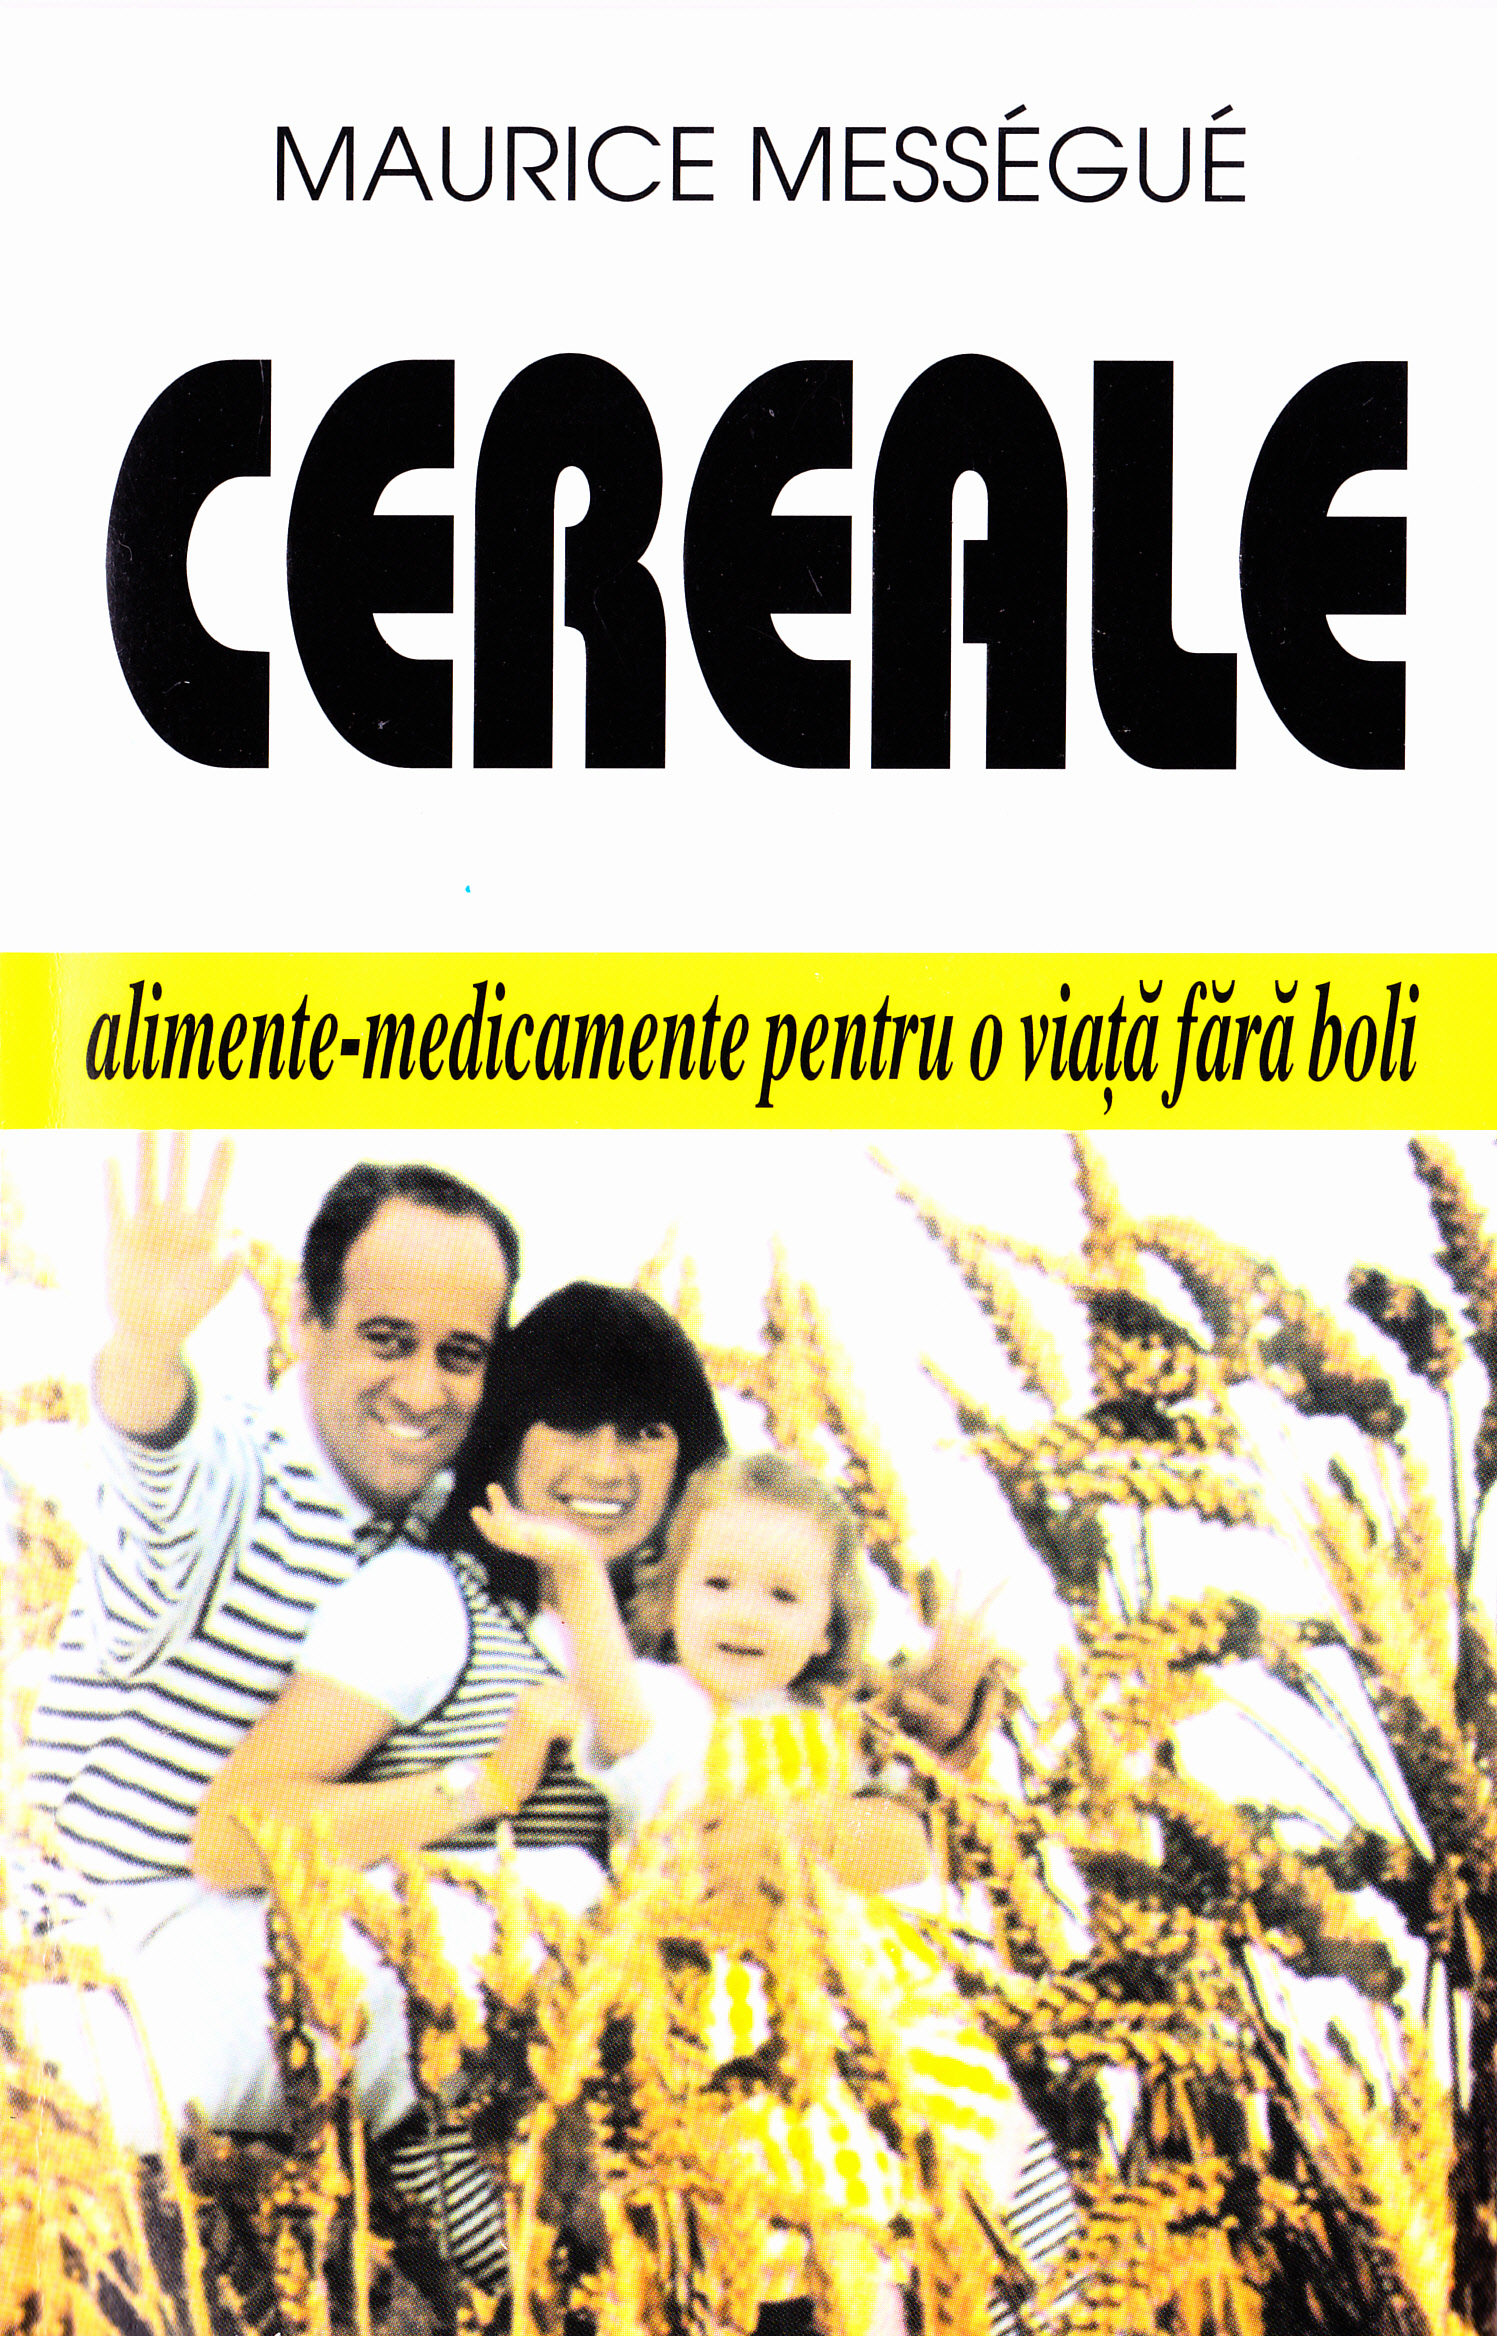 Cereale - Maurice Messegue